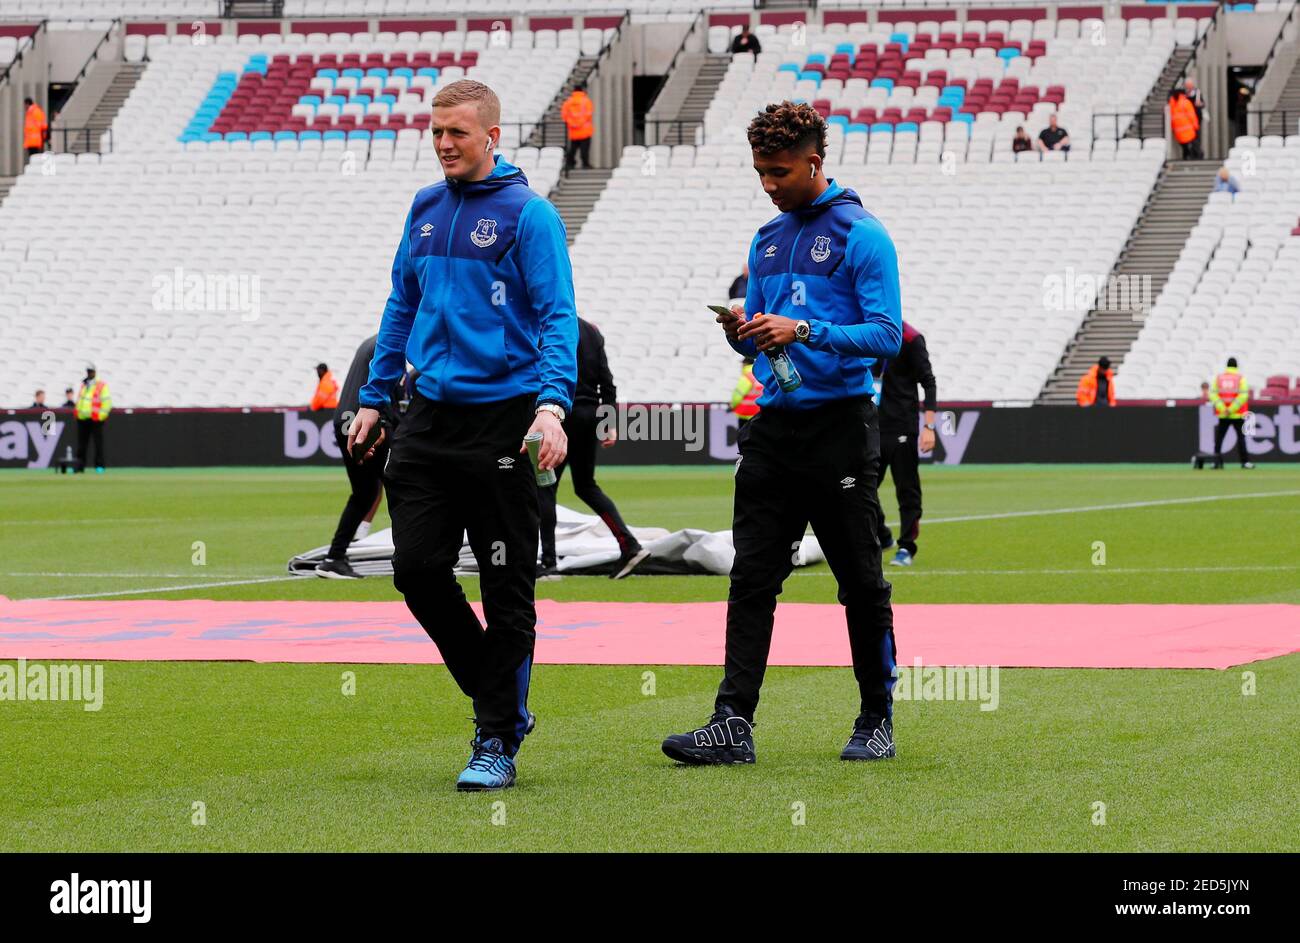 Soccer Football - Premier League - West Ham United vs Everton - London Stadium, London, Britain - May 13, 2018   Everton's Jordan Pickford and Mason Holgate on the pitch before the match    REUTERS/Eddie Keogh    EDITORIAL USE ONLY. No use with unauthorized audio, video, data, fixture lists, club/league logos or 'live' services. Online in-match use limited to 75 images, no video emulation. No use in betting, games or single club/league/player publications.  Please contact your account representative for further details. Stock Photo